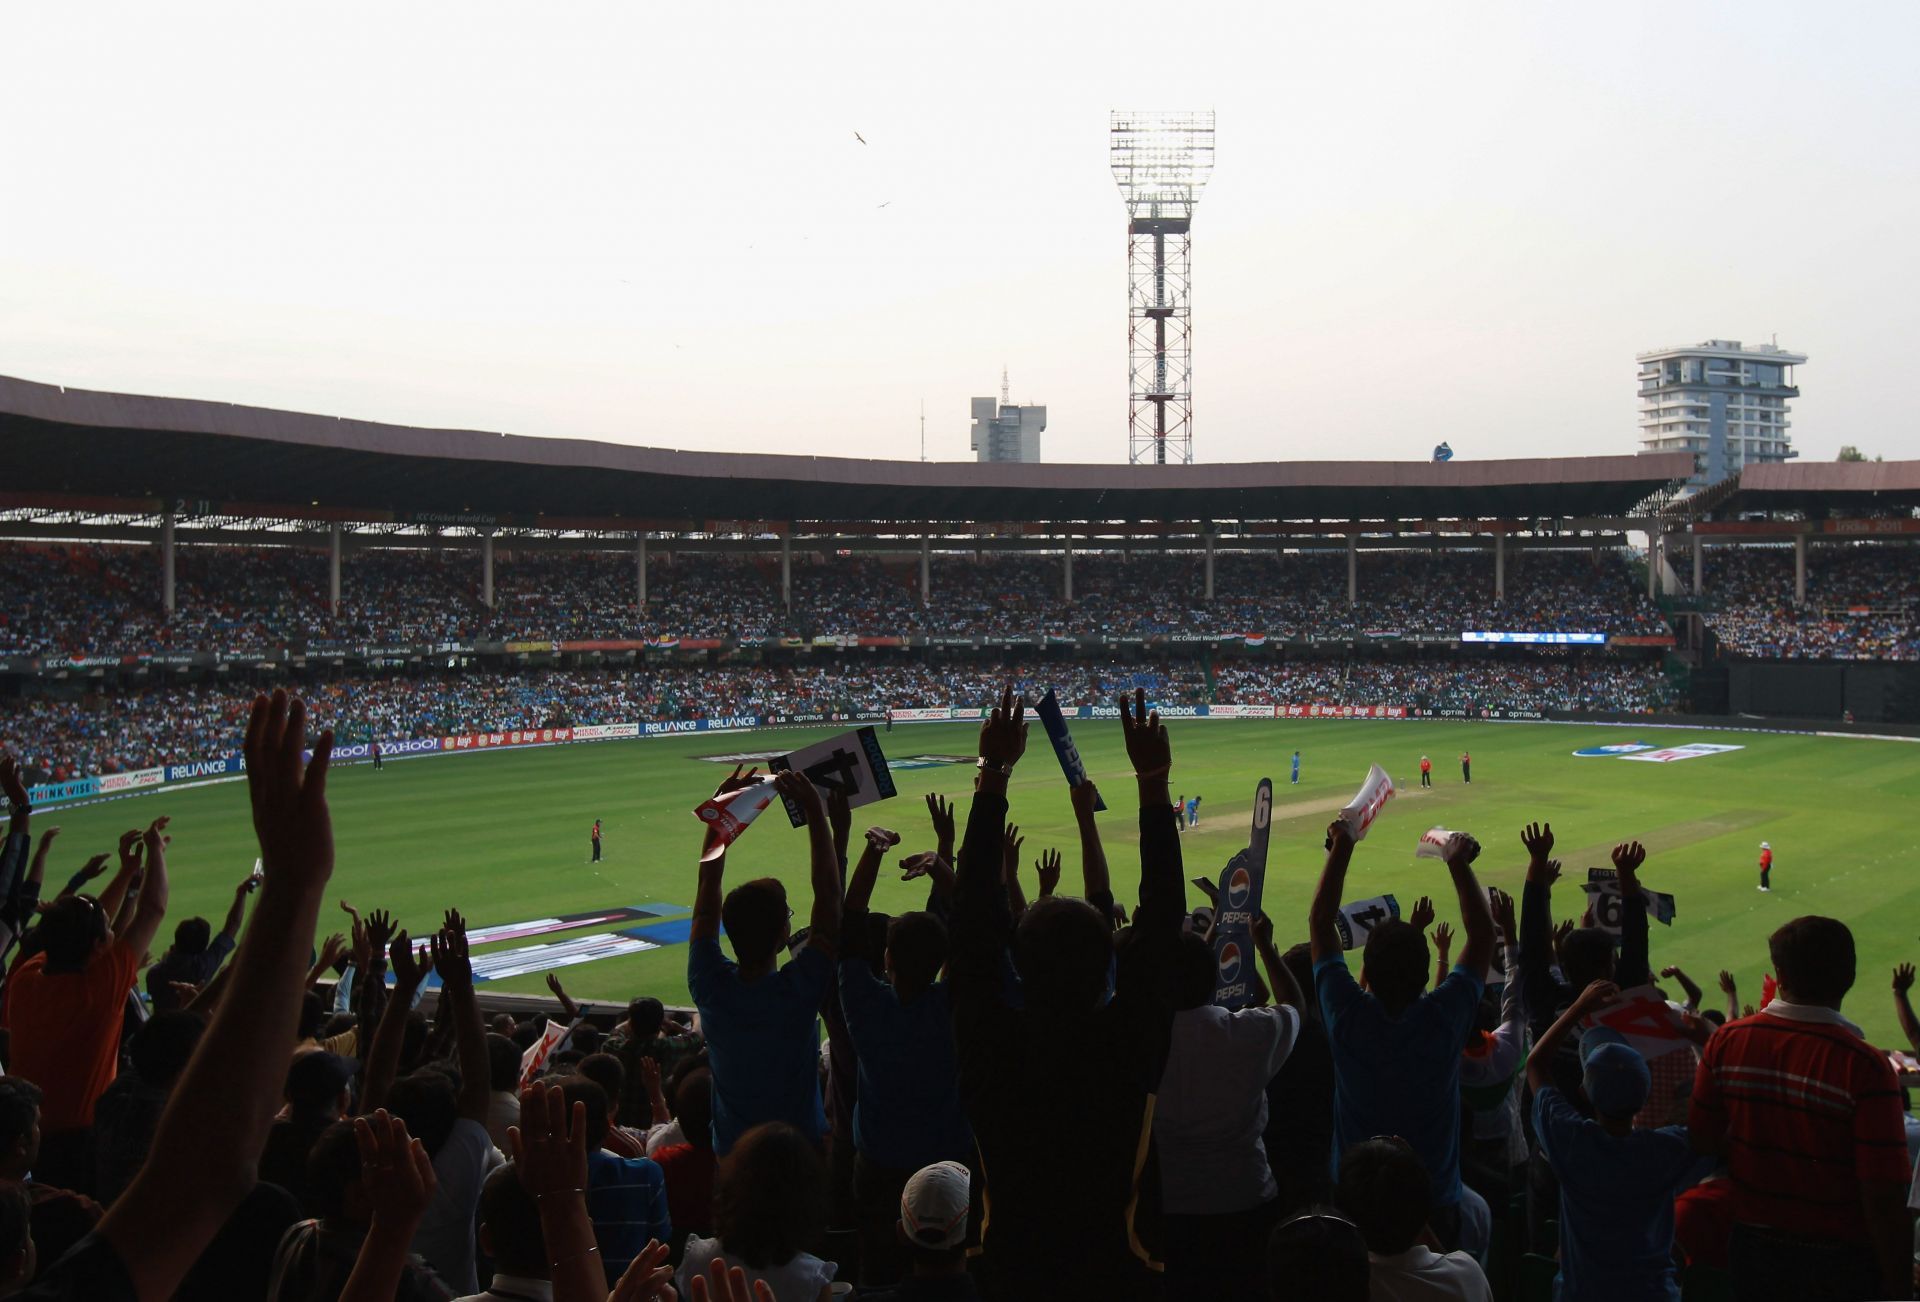 The government has allowed 100% capacity crowd for the match in Bengaluru